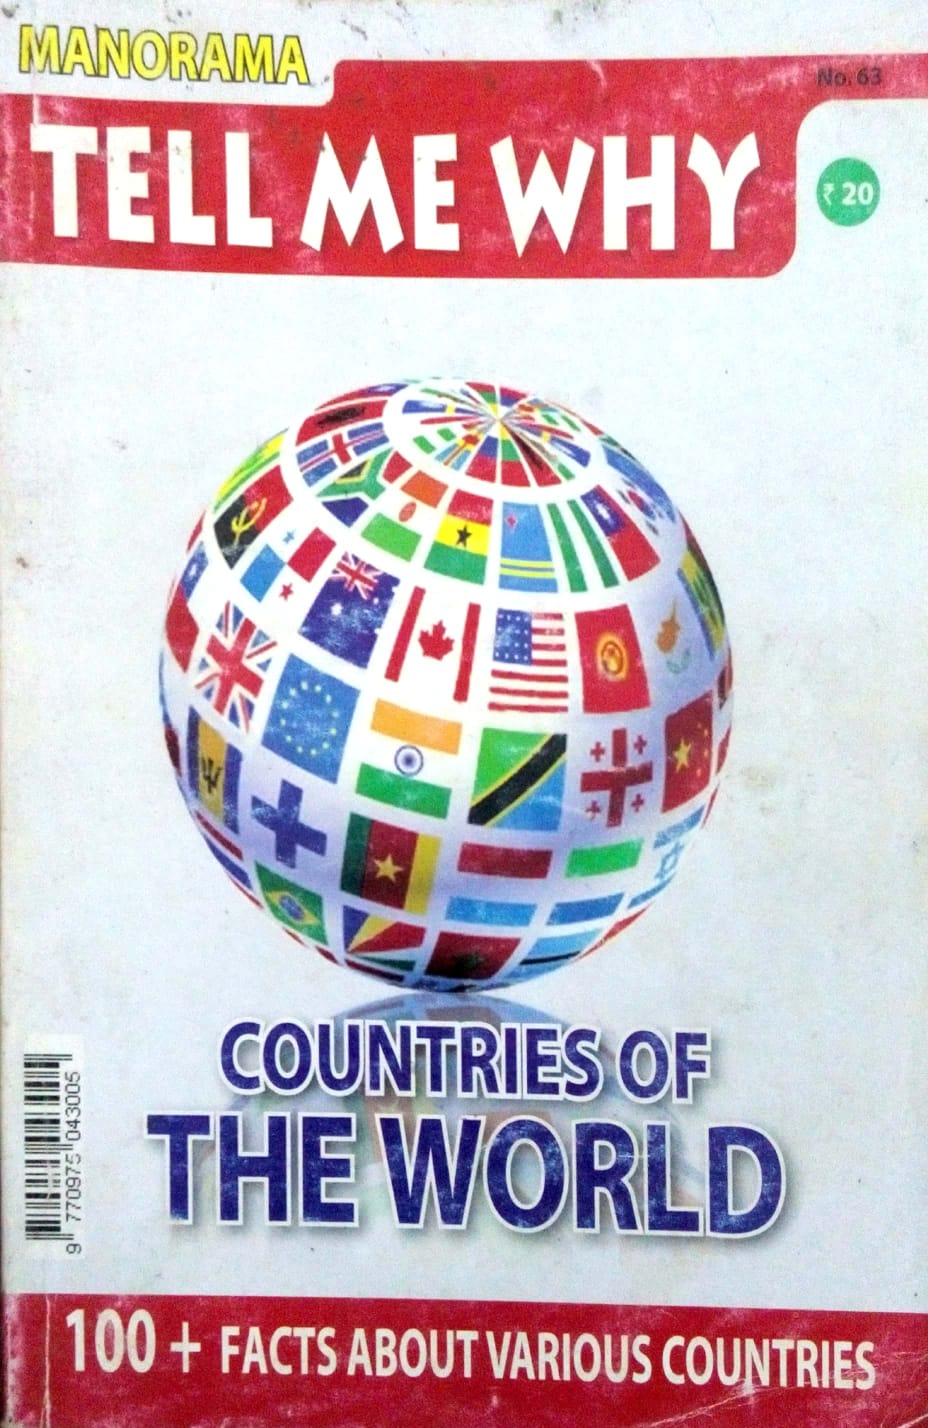 Tell me why: Countries of the world  Half Price Books India Books inspire-bookspace.myshopify.com Half Price Books India